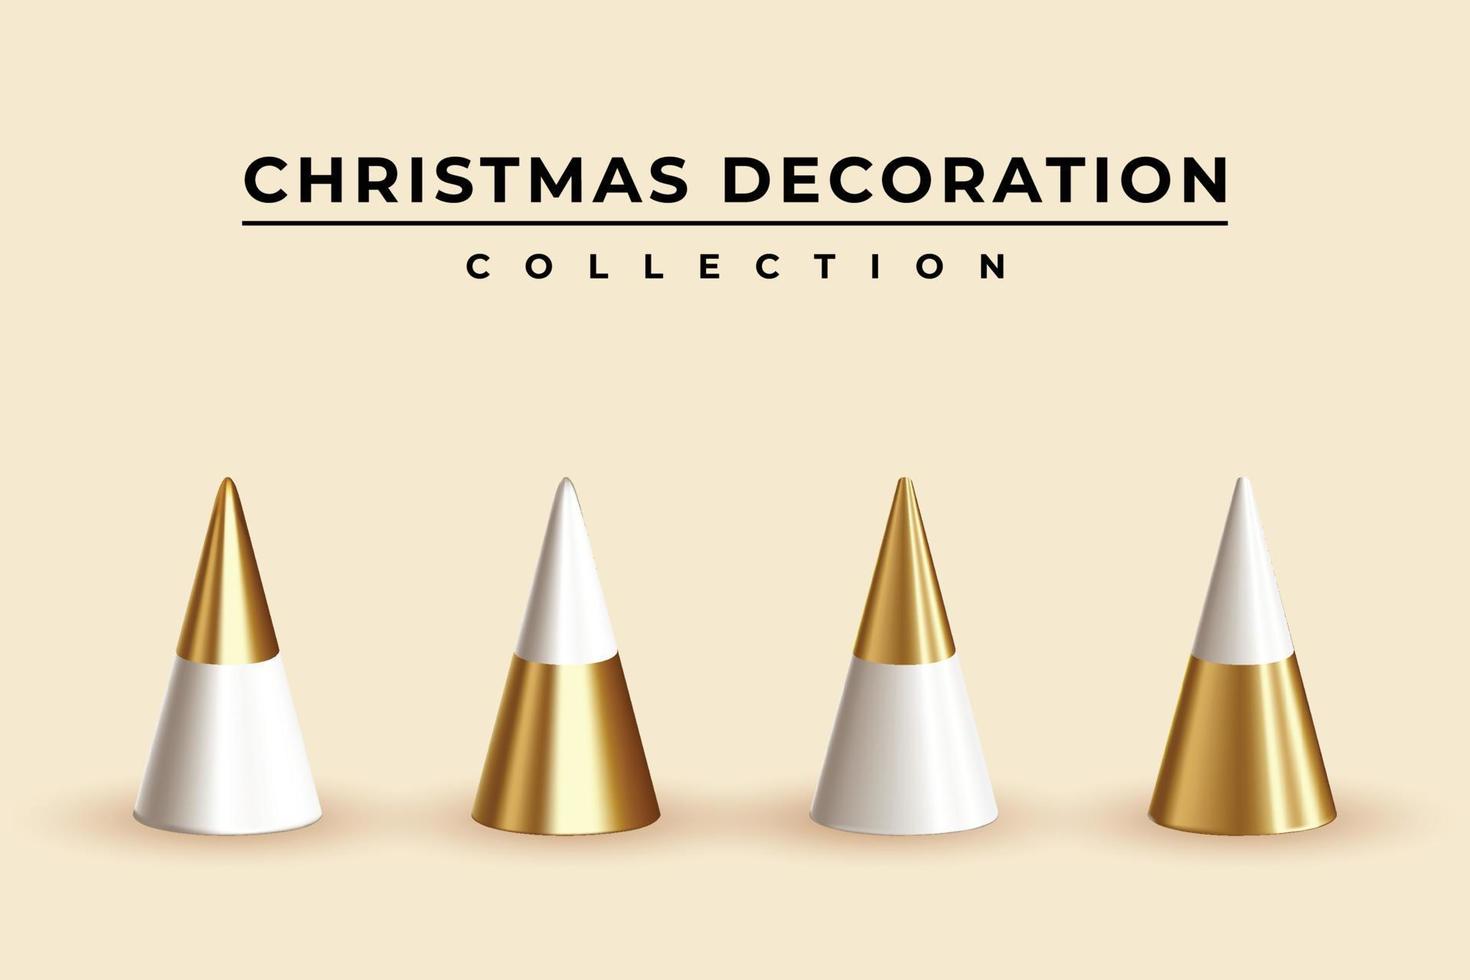 New realistic gold and white cones for Christmas decoration collection vector